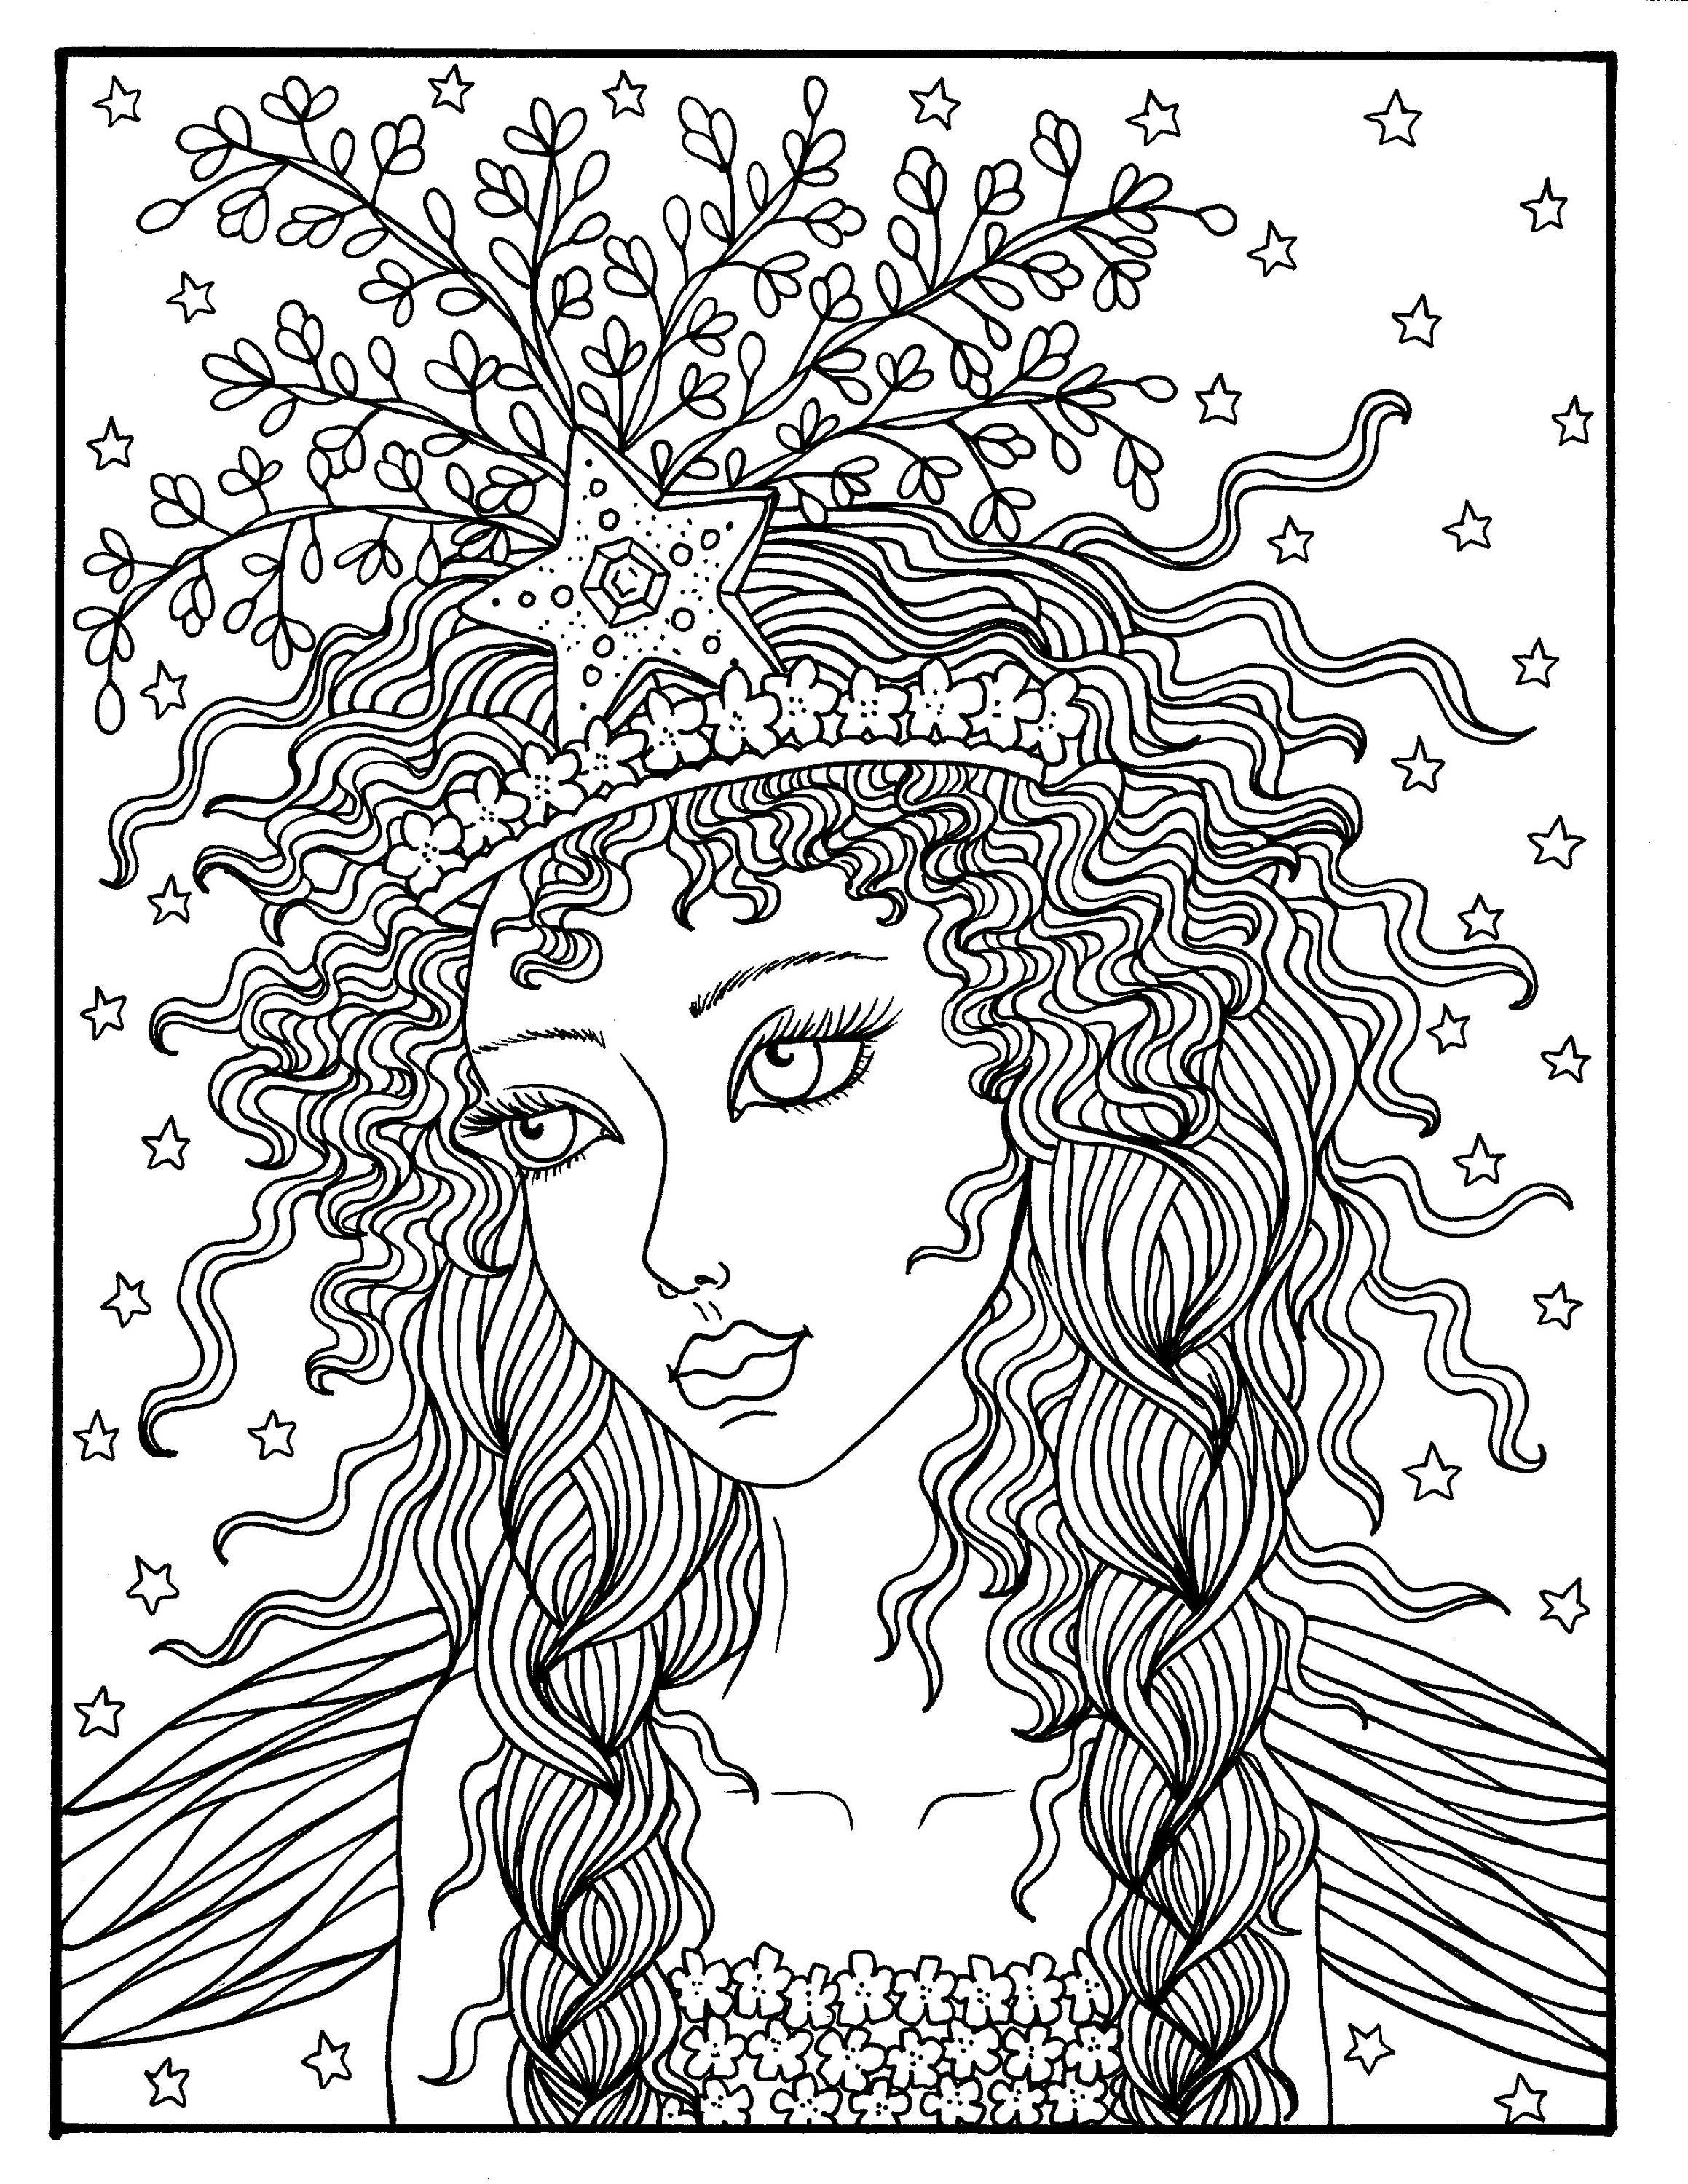 Download 5 Pages Fairies Digital Downloads Instant Coloring Pages | Etsy